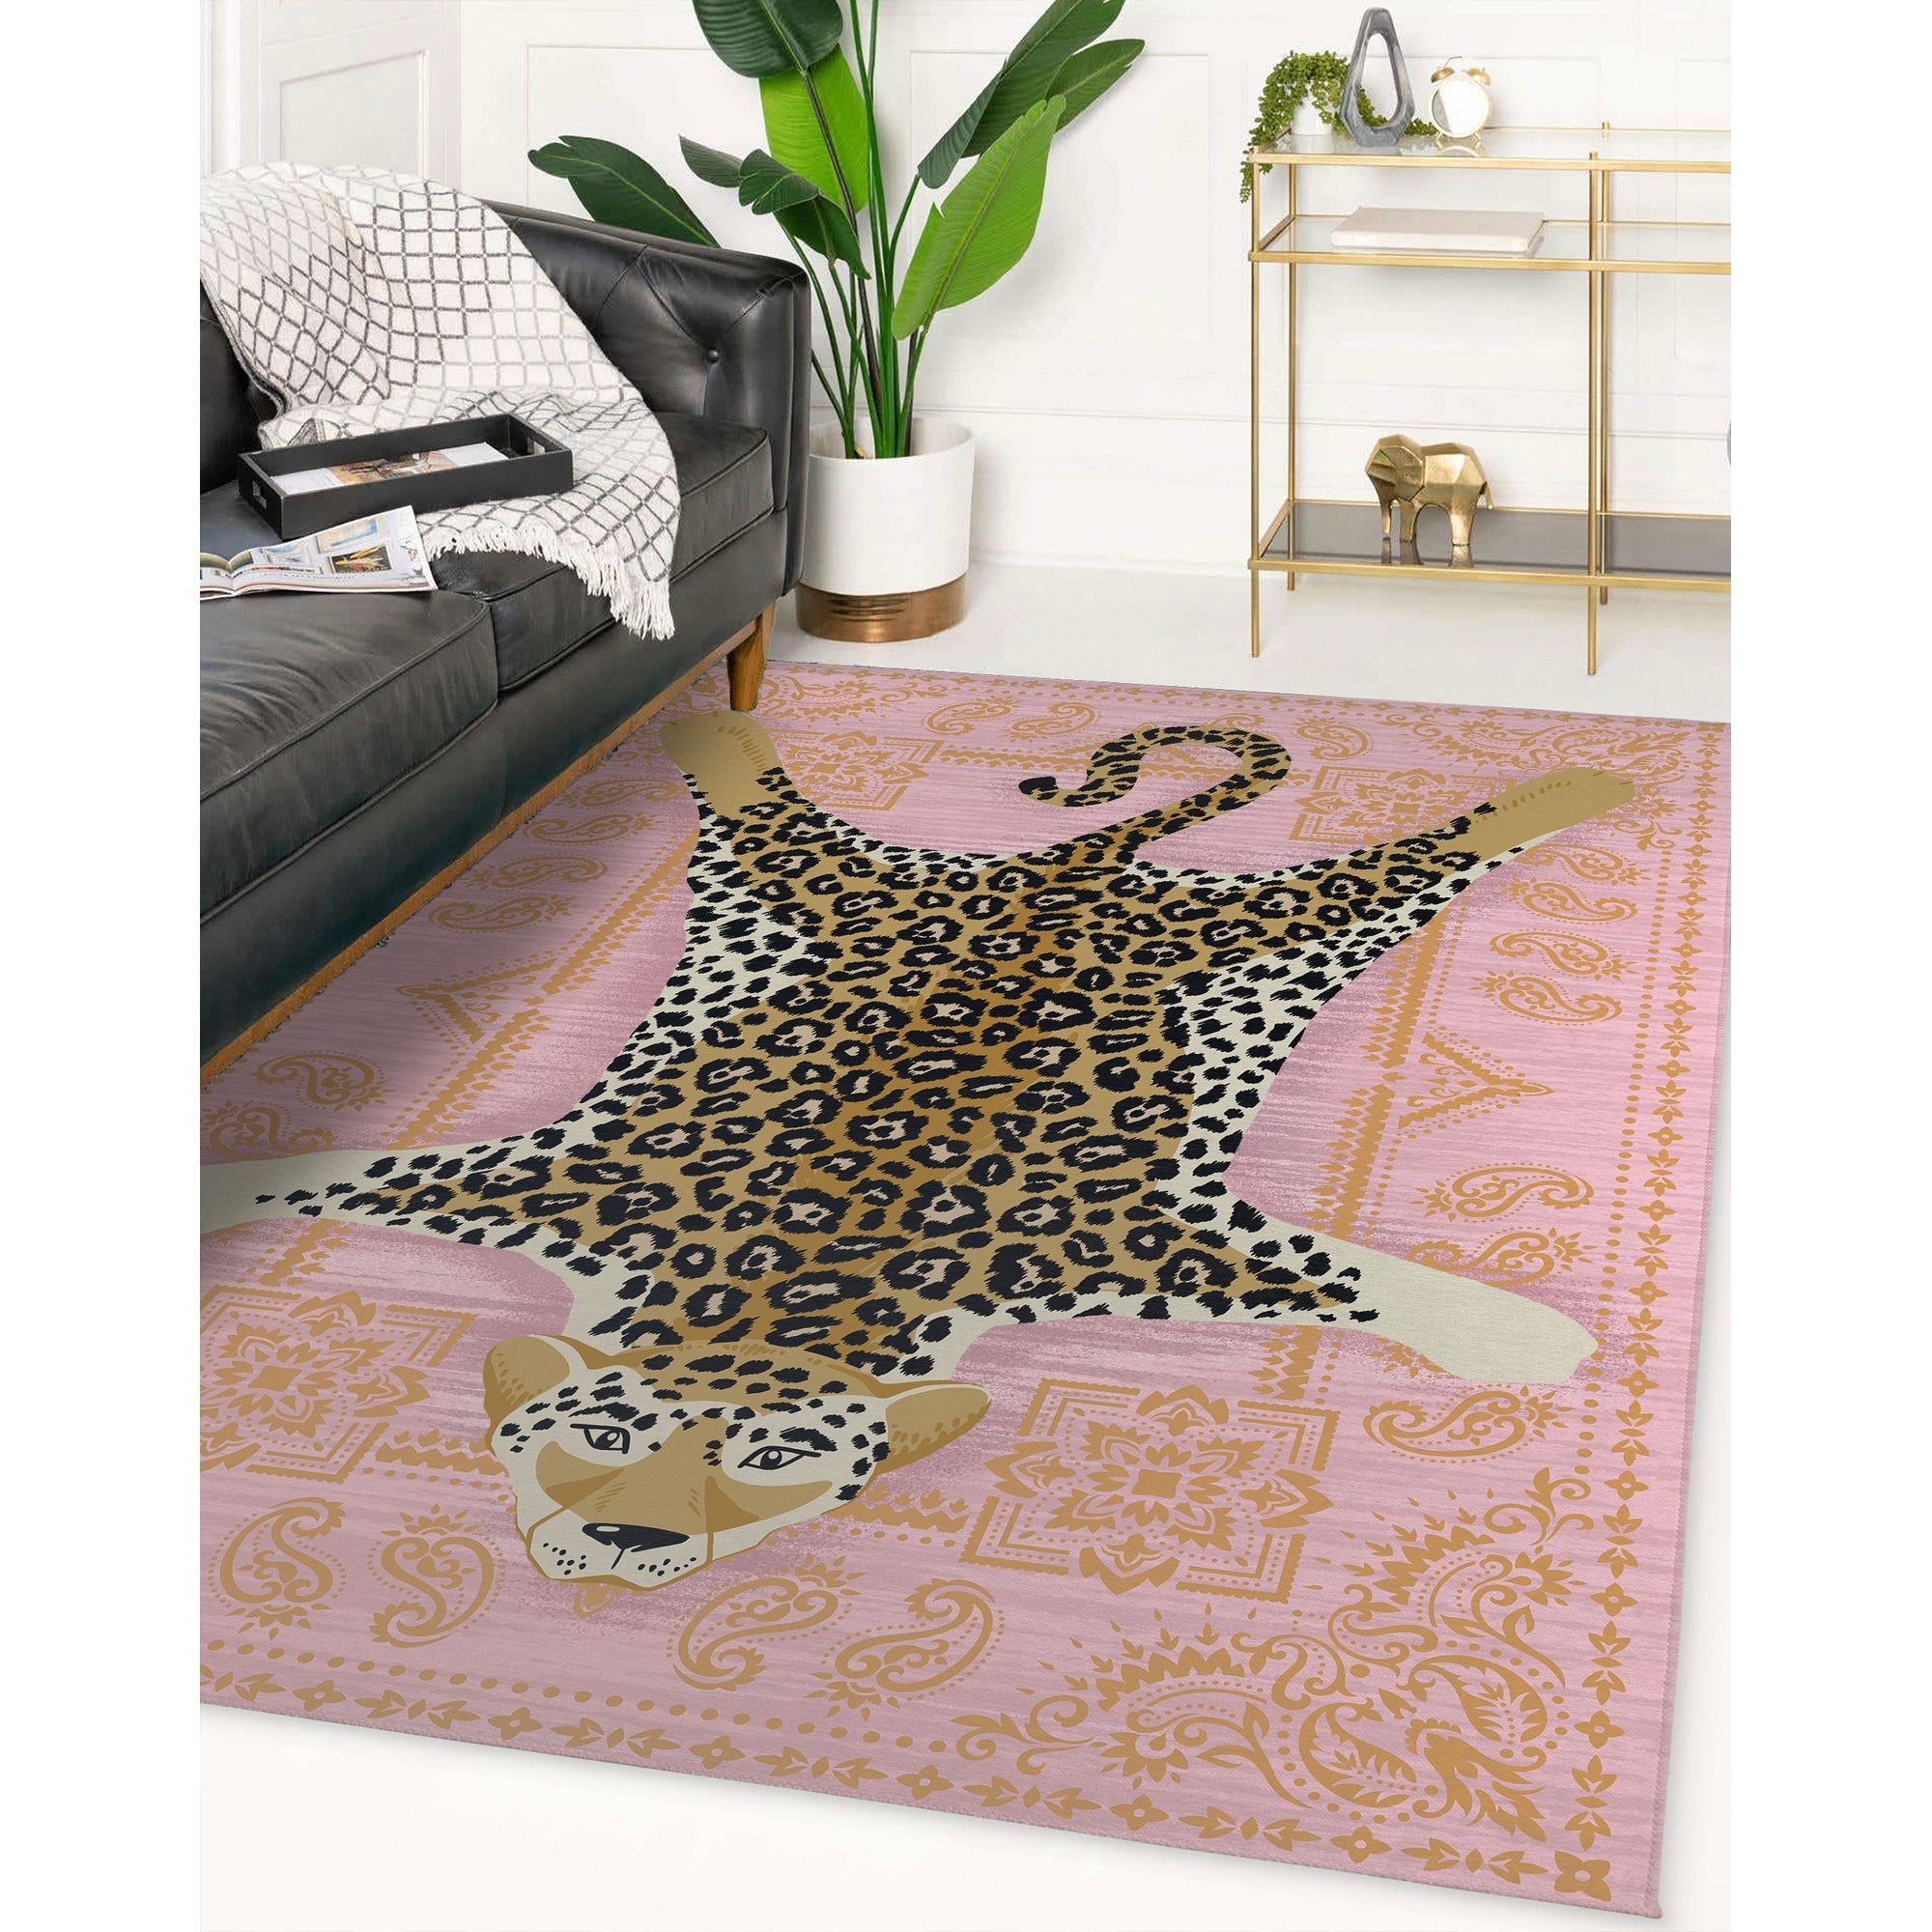 https://ak1.ostkcdn.com/images/products/is/images/direct/f9f0ecc2d6038c921bd9cab94ccd179b2c33b8b3/LEOPARD-PINK-Area-Rug-By-Kavka-Designs.jpg